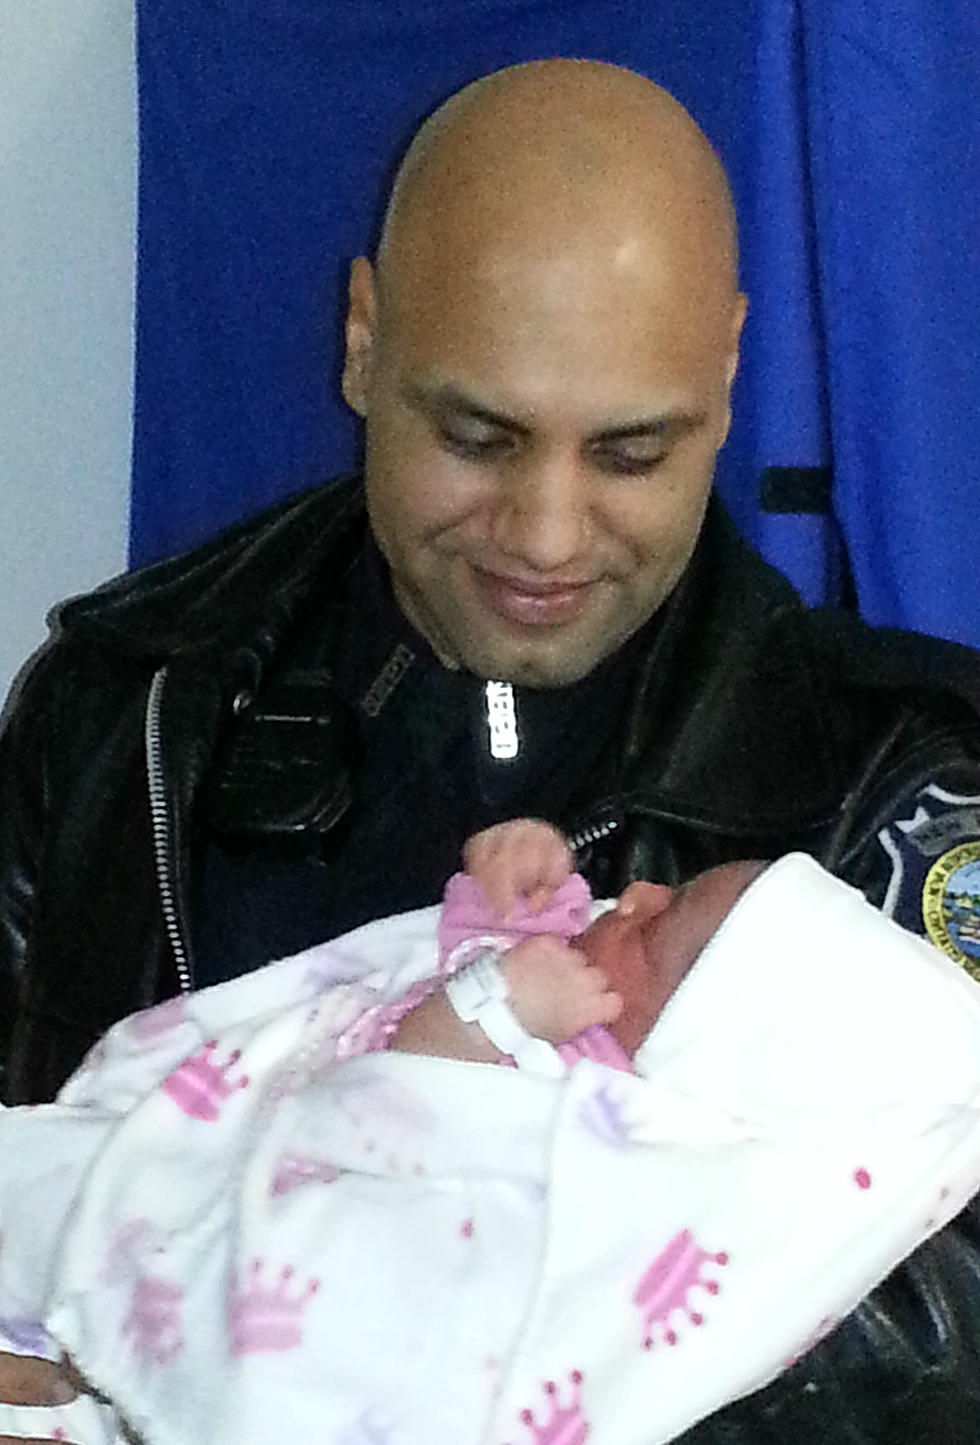 Thanks to New Bedford Officer, Mother and Child Doing Well